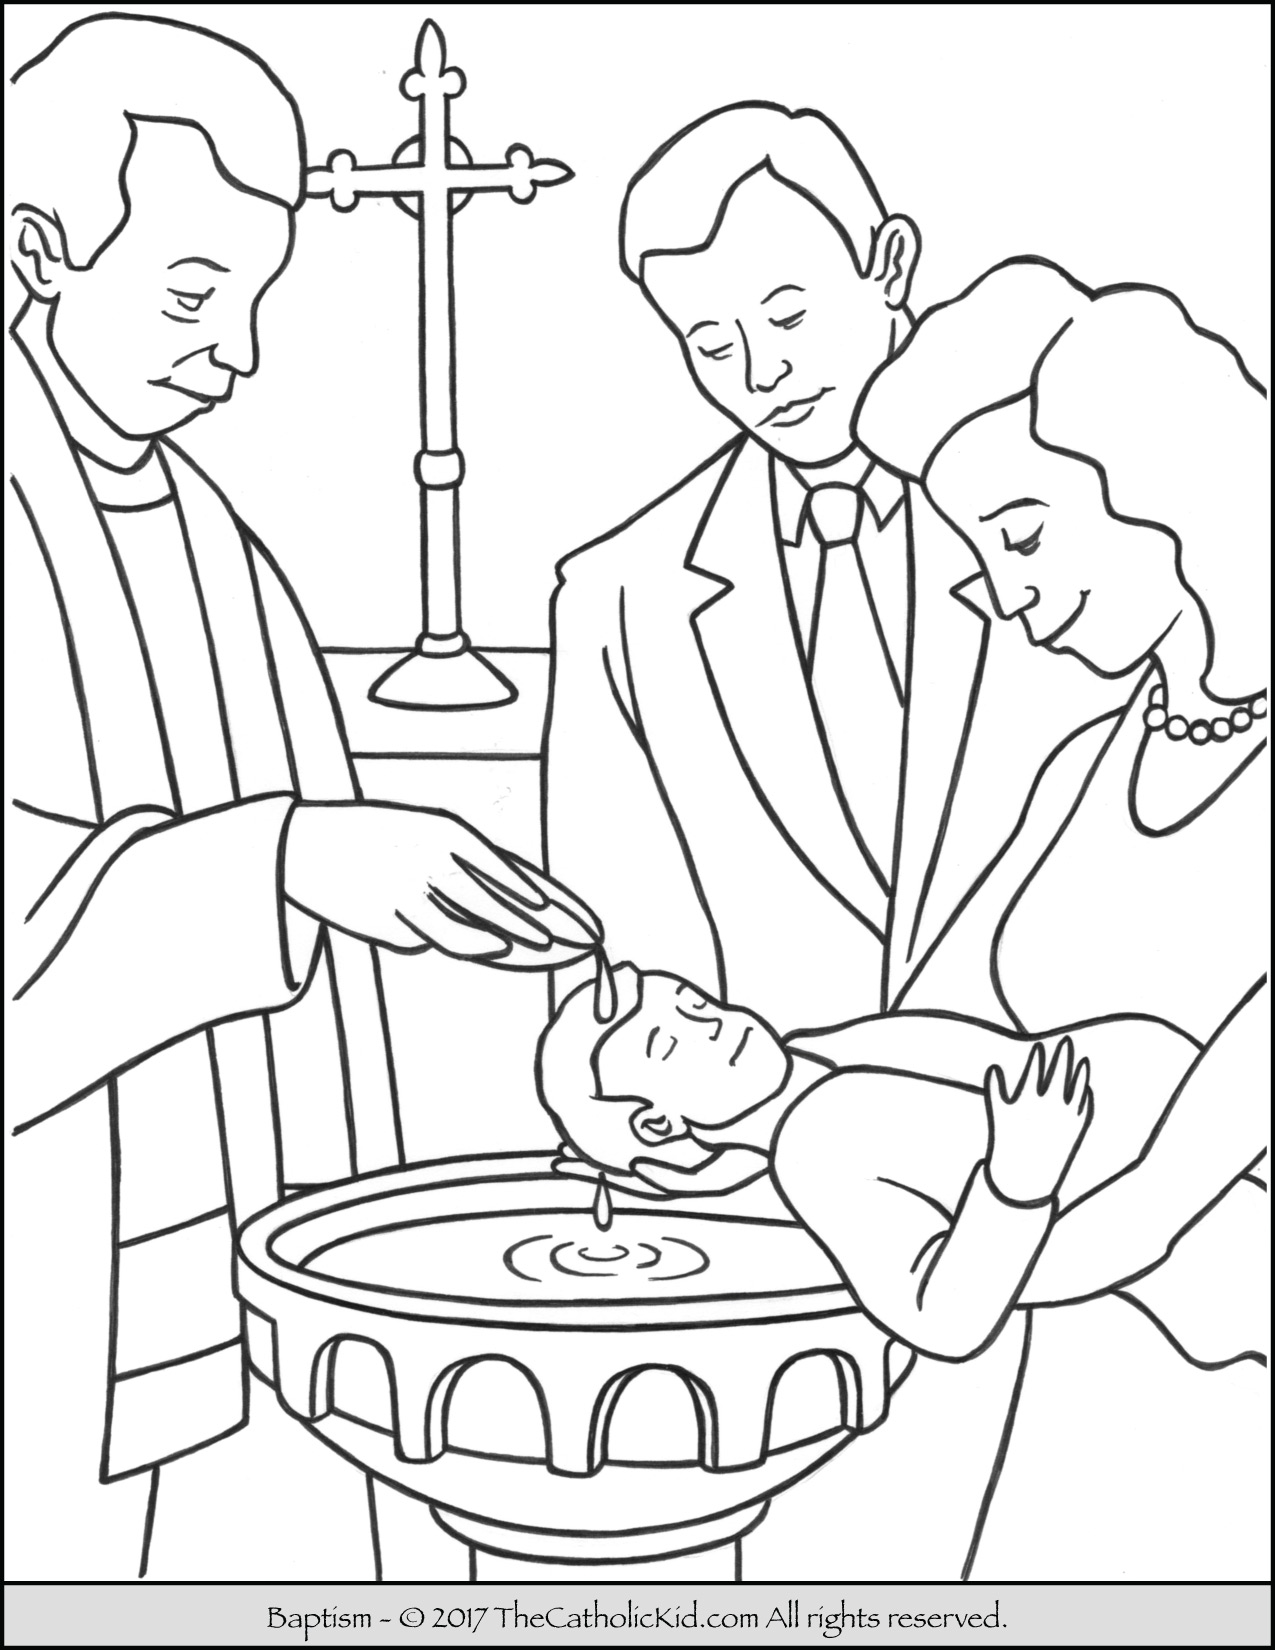 Baptism Coloring Pages at Free printable colorings